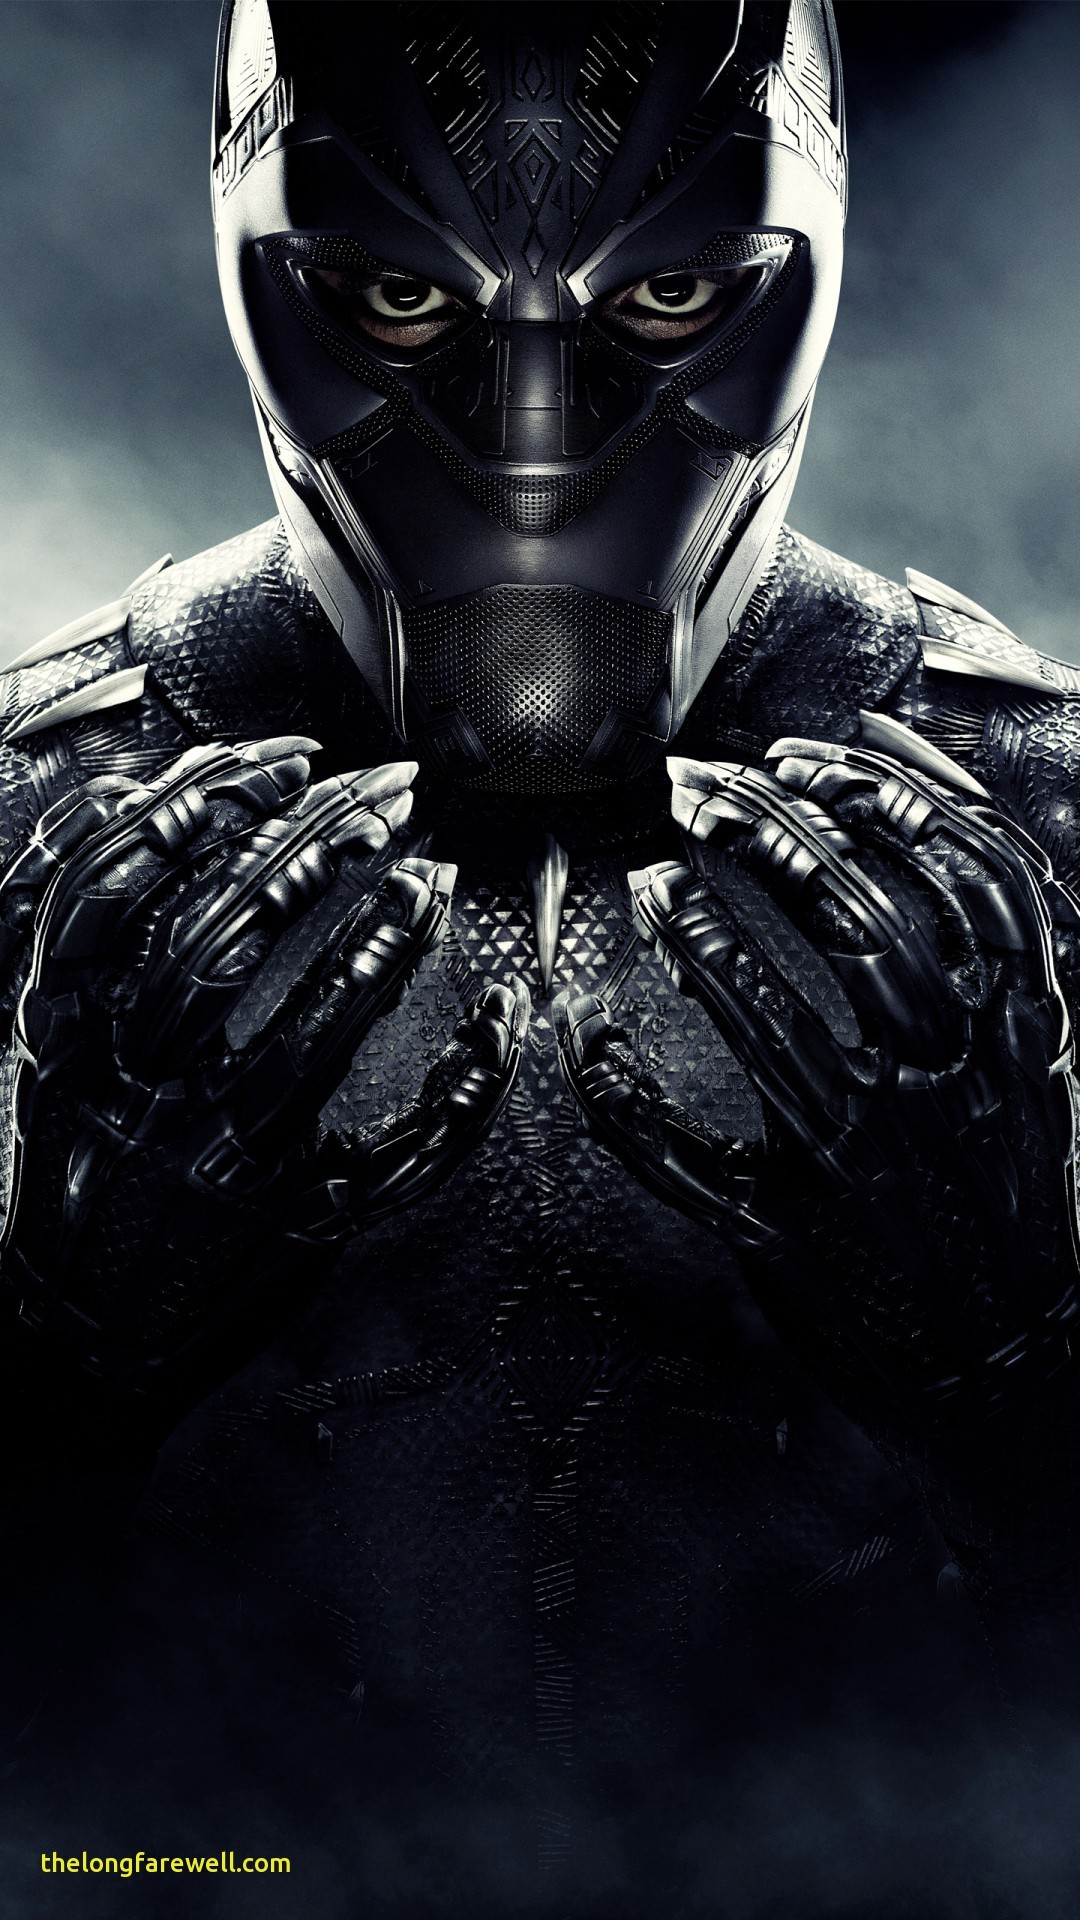 1080x1920, Iphone 6 6s Plus 7 Plus 8 Plus Resolutions - Black Panther Hd  Wallpapers For Android - 1080x1920 Wallpaper 